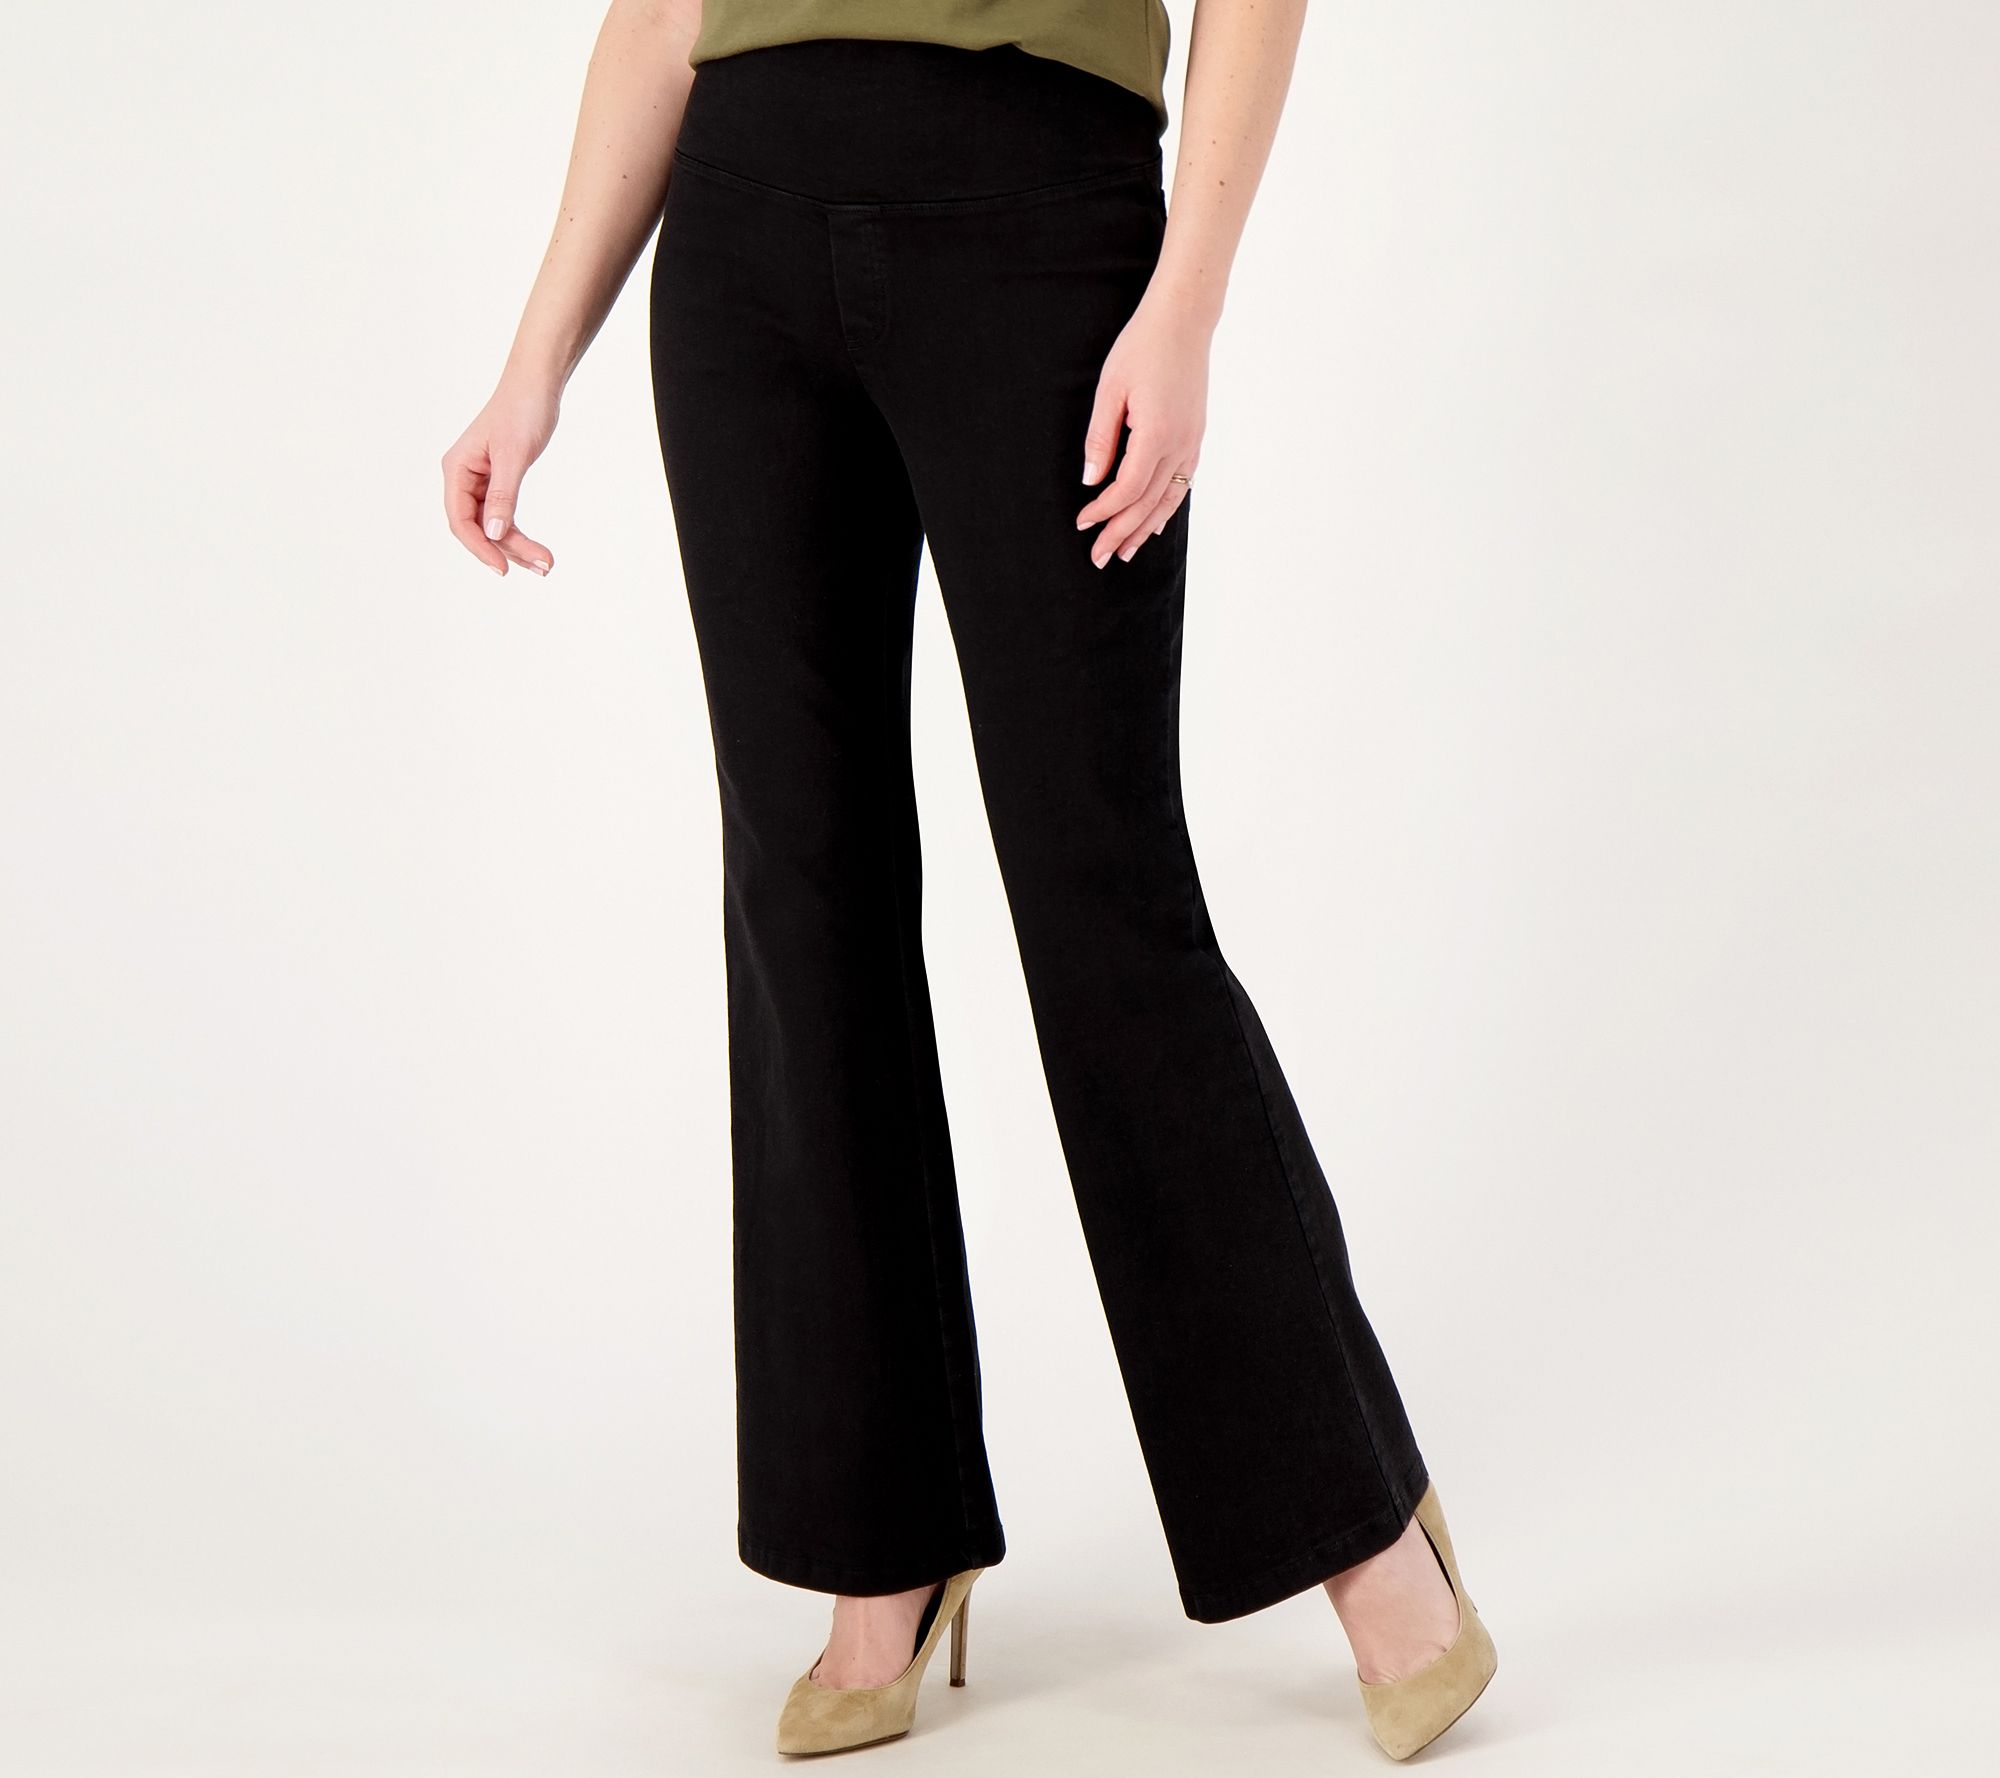 All the pretty ladies, know that our Tummy Shaper Pants are the